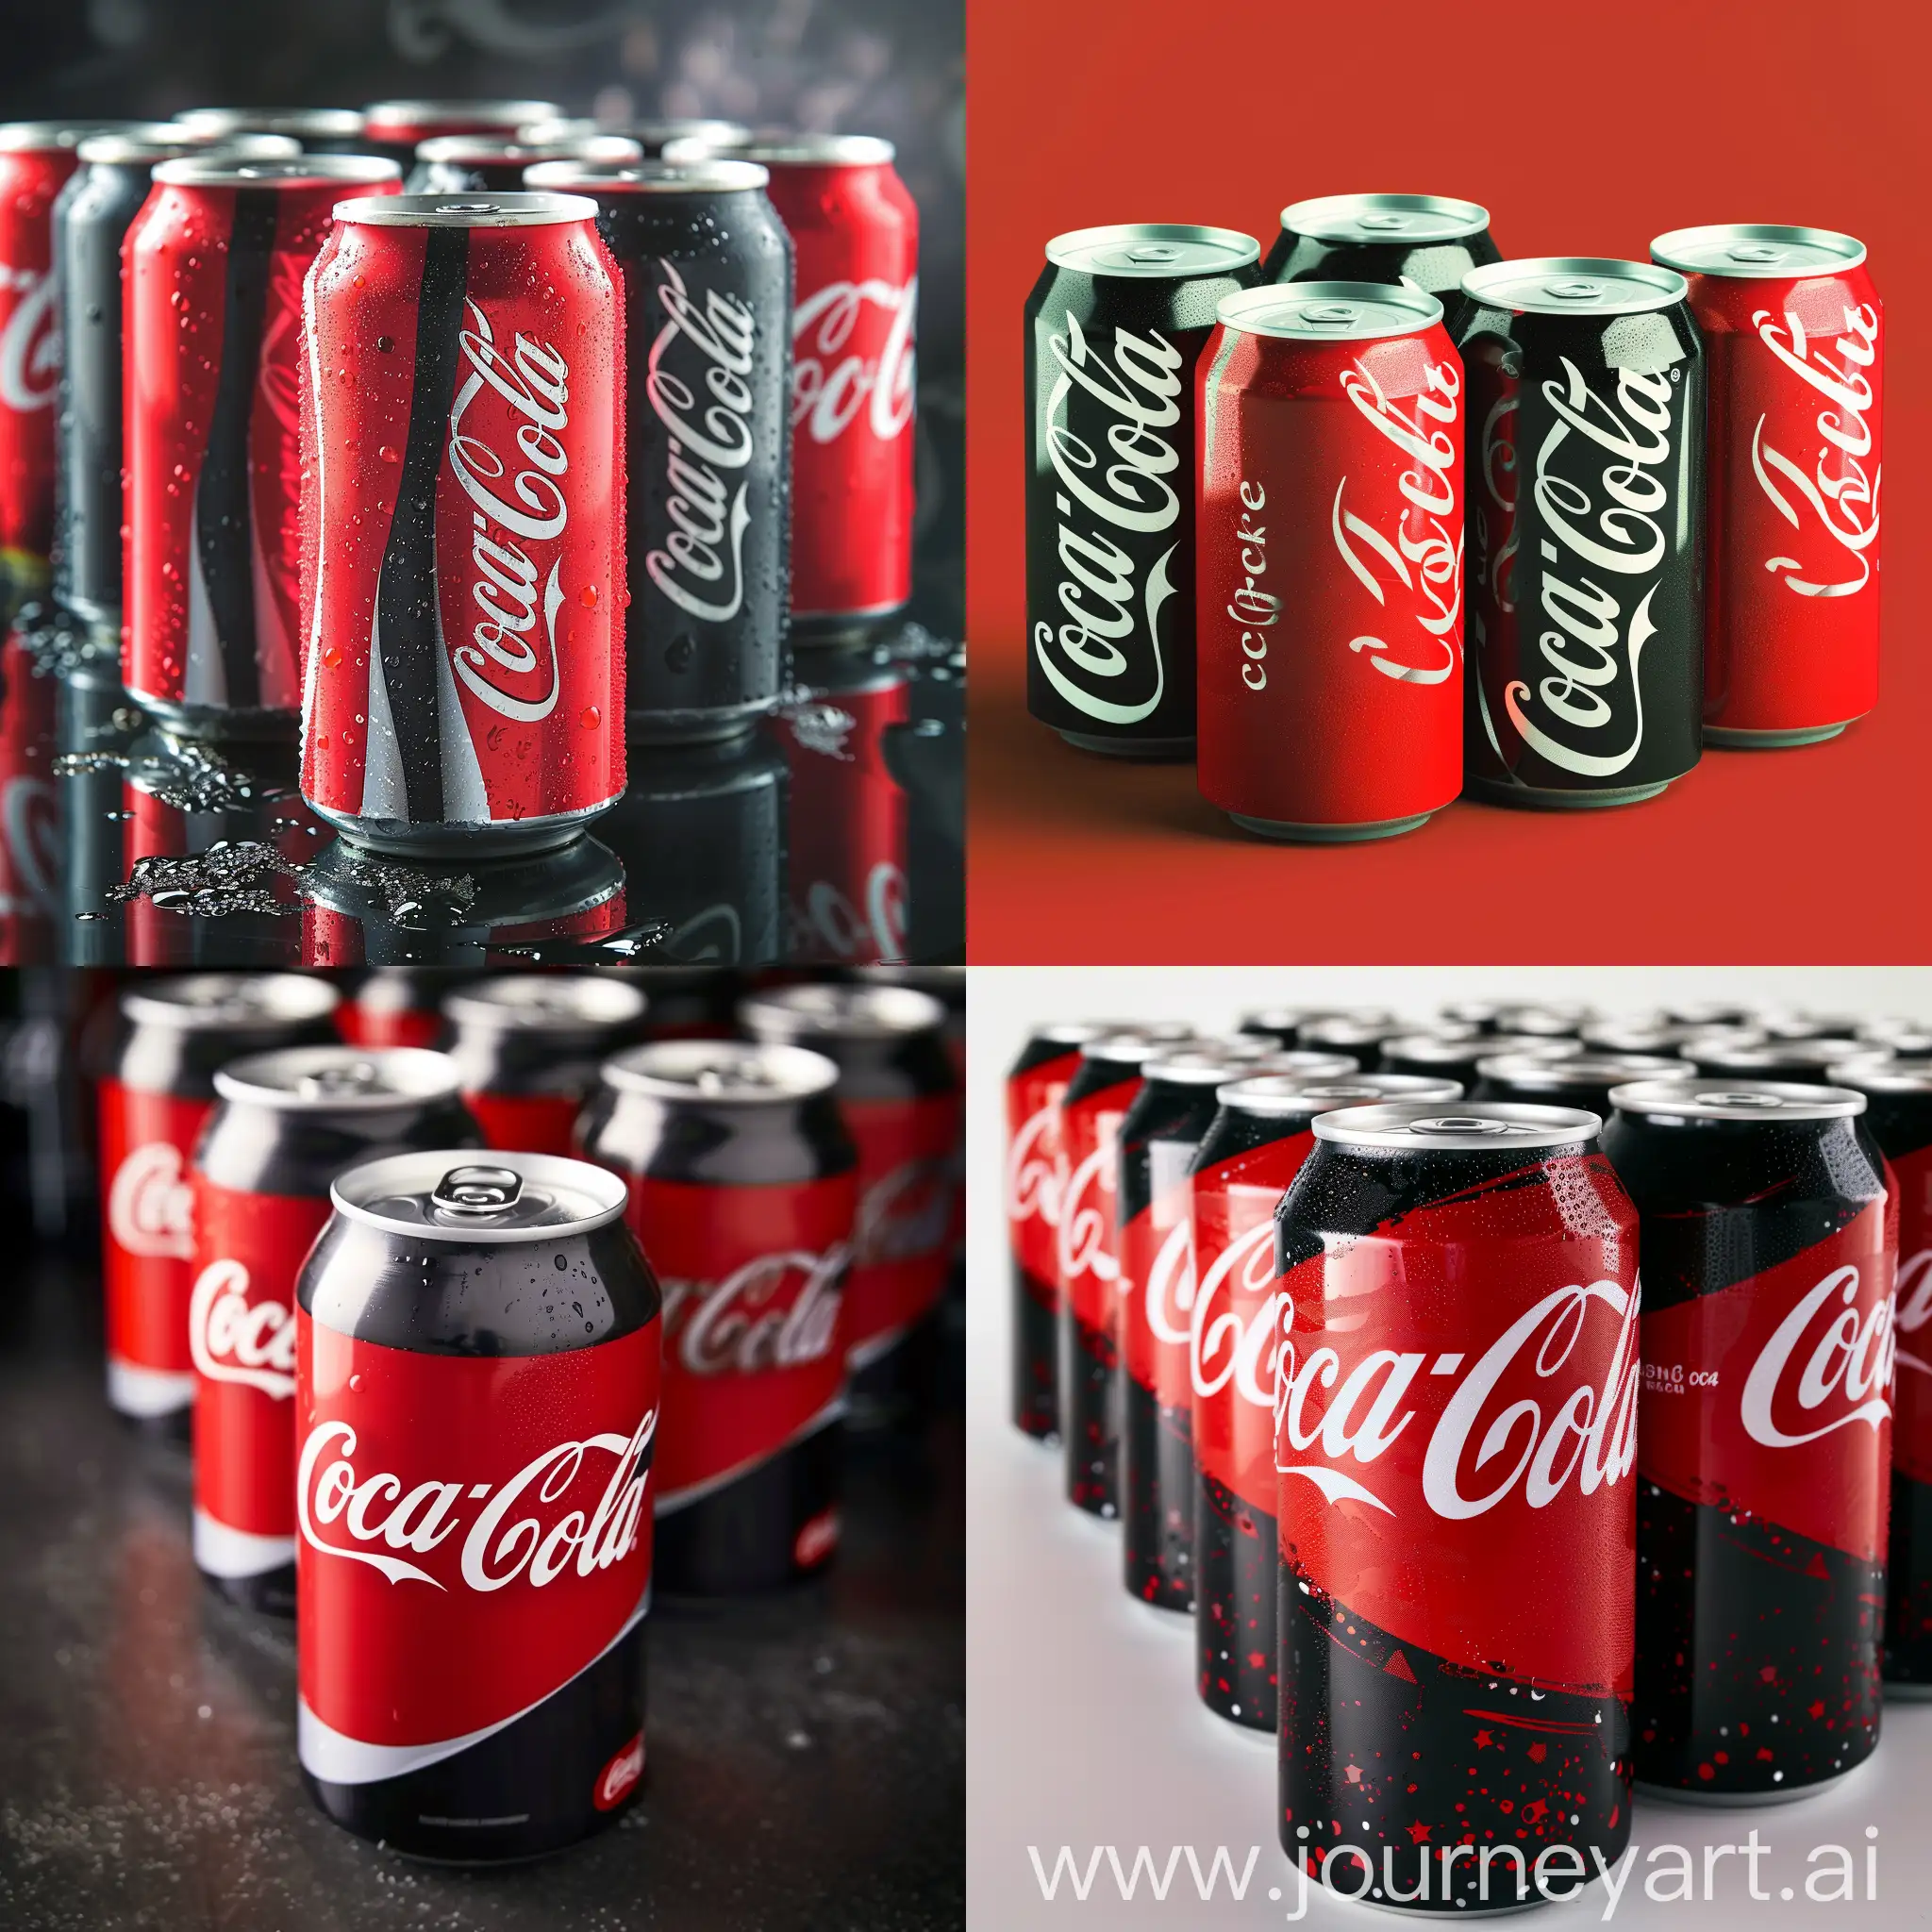 Vibrant-Coca-Cola-Soda-Branding-Banner-with-Red-and-Black-Cans